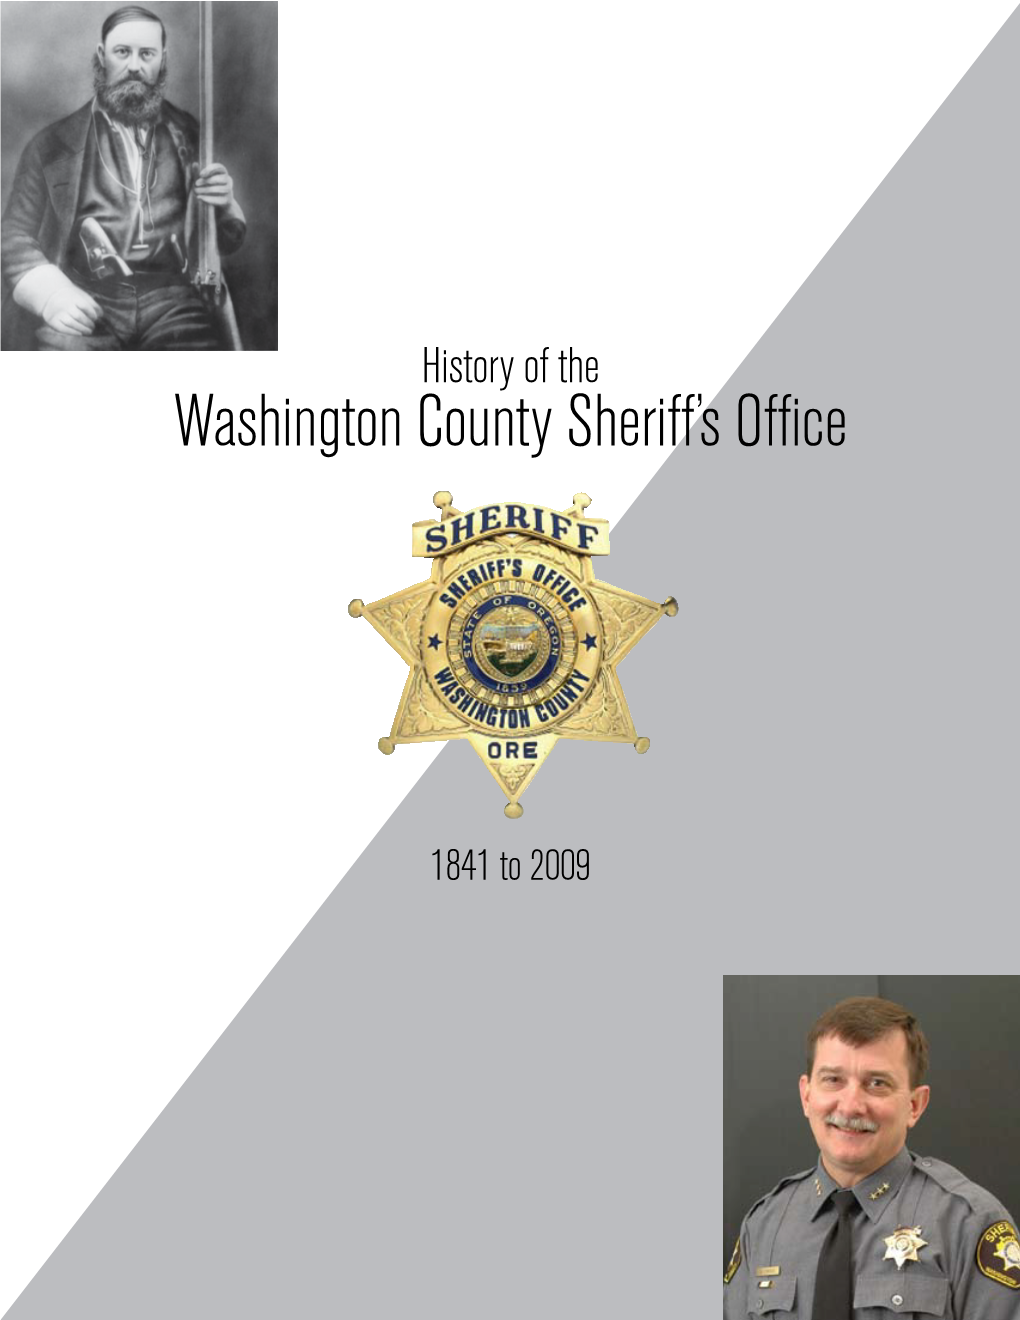 History of the Sheriff's Office